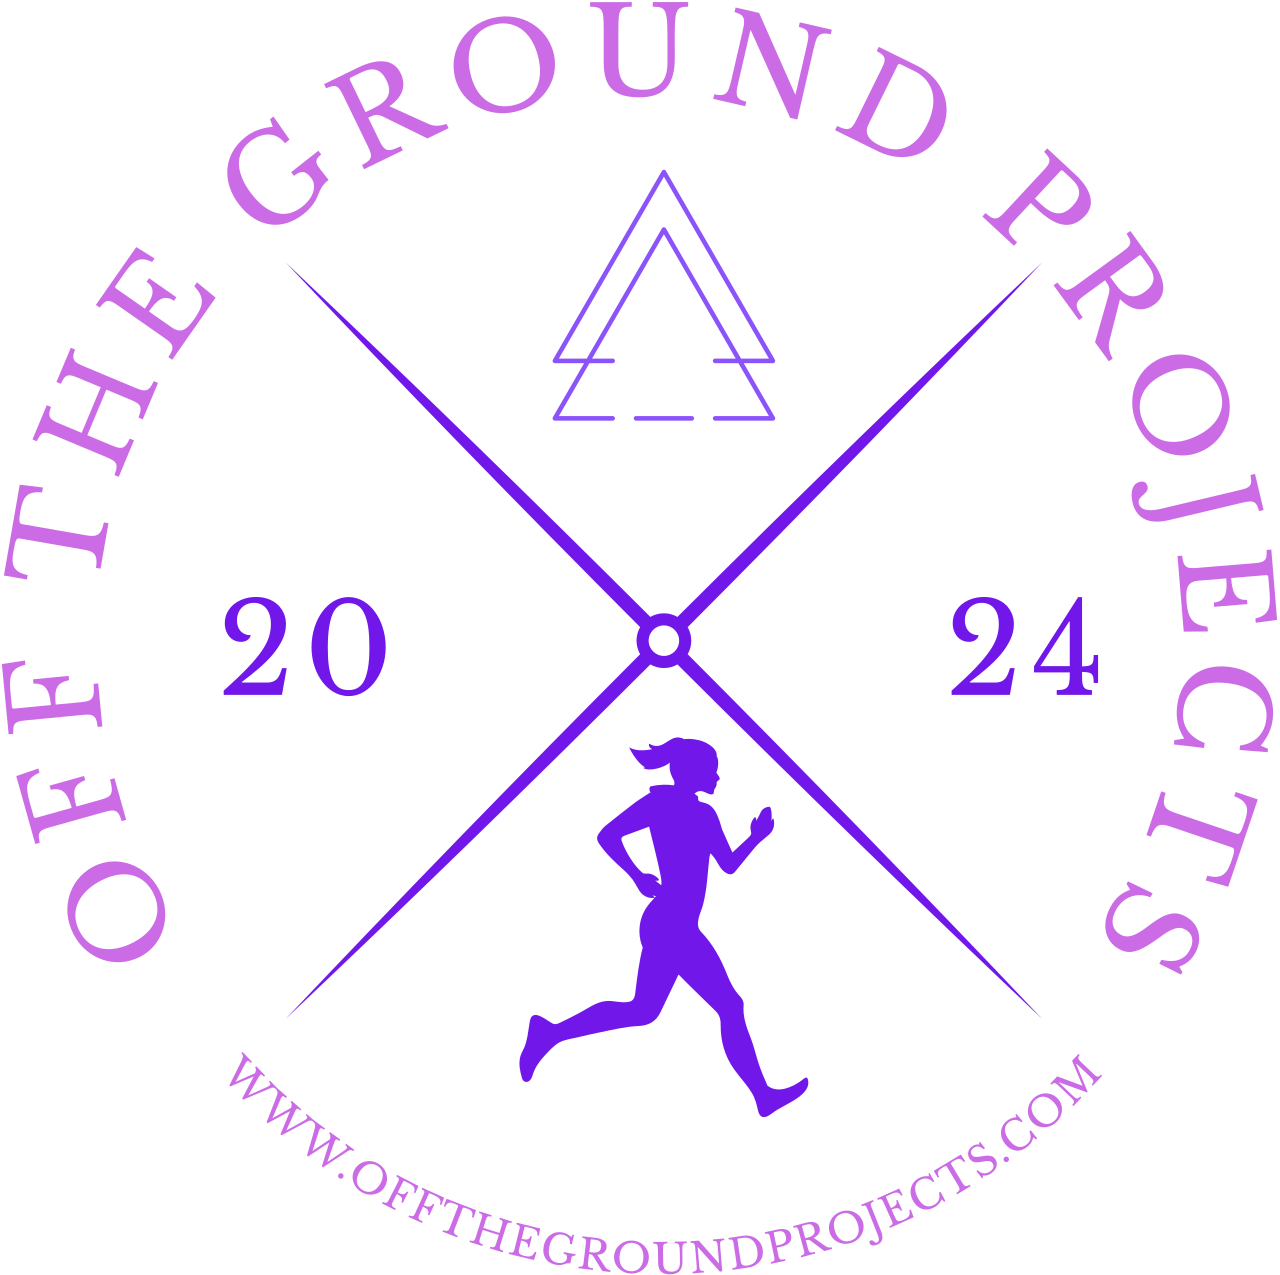 OFF THE GROUND PROJECTS's logo